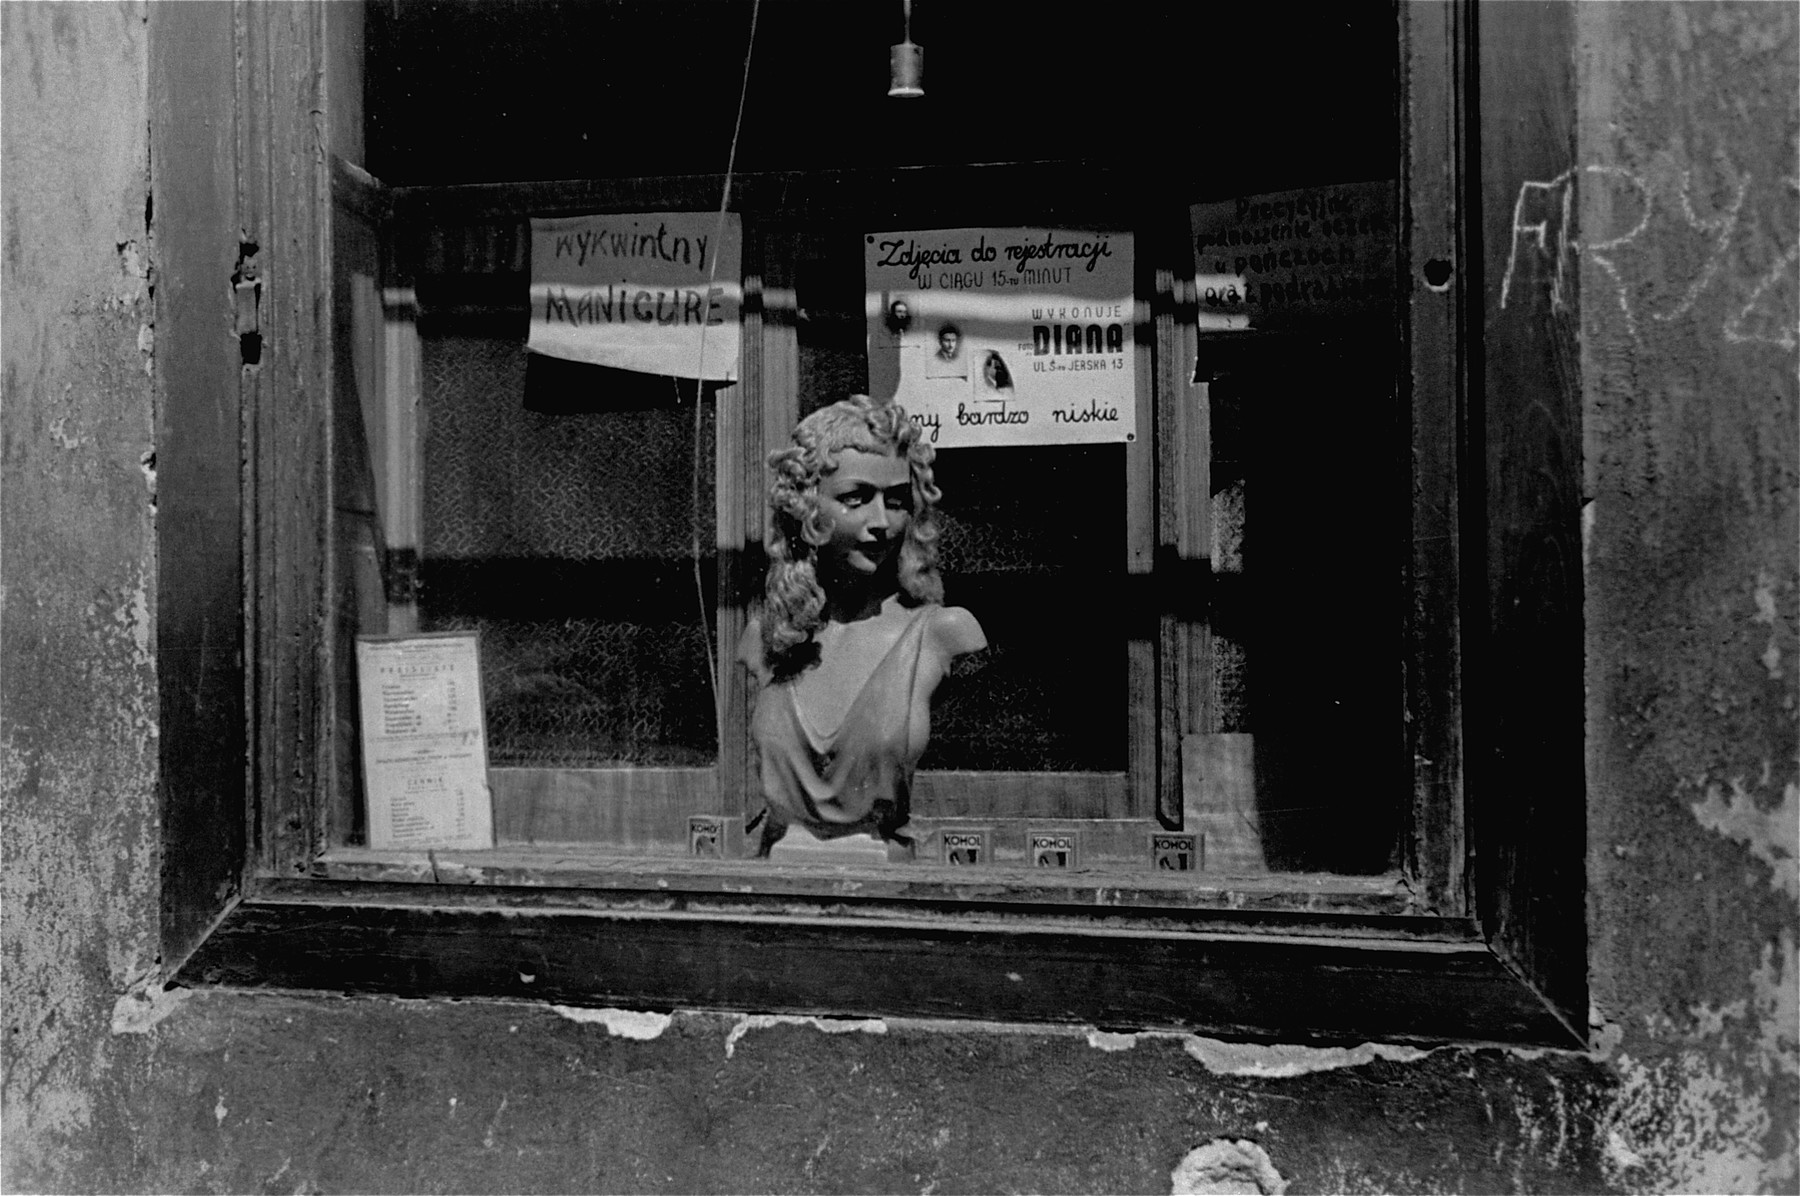 A shop window in the Warsaw ghetto advertising different services, including stocking repair, passport photos and manicures.  The chalk sign on the wall reads "barbershop."